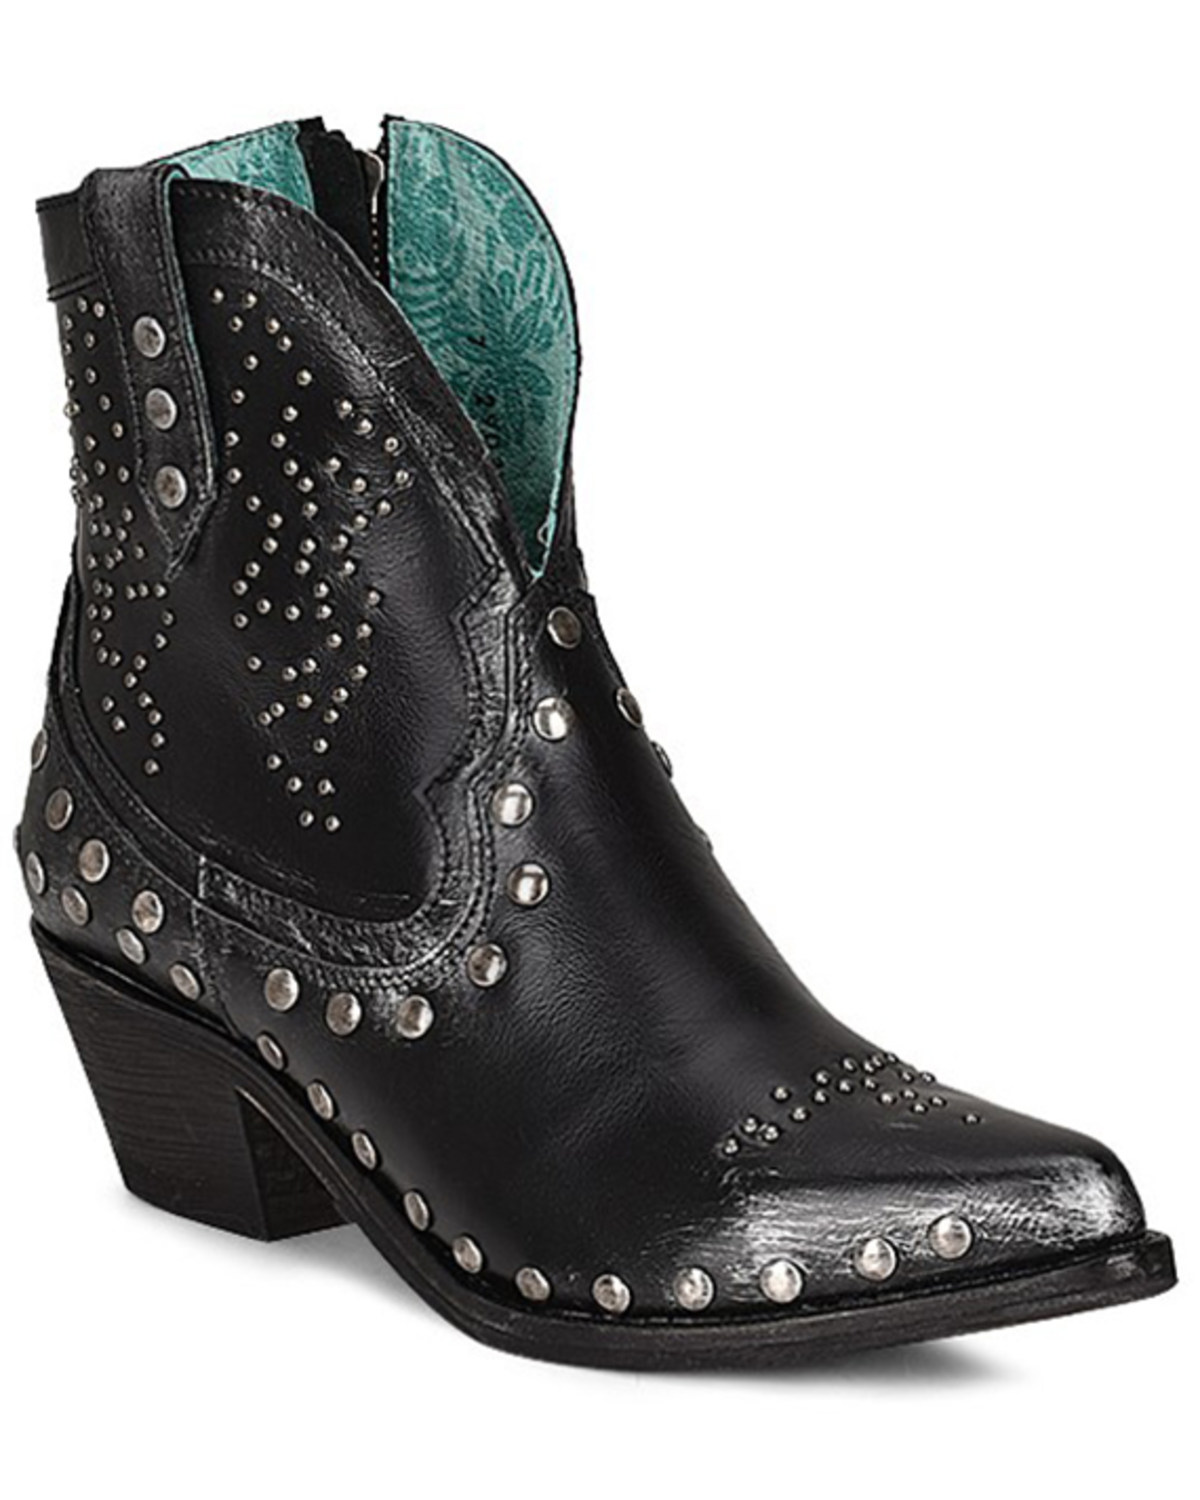 Corral Women's Studded Ankle Boots - Pointed Toe